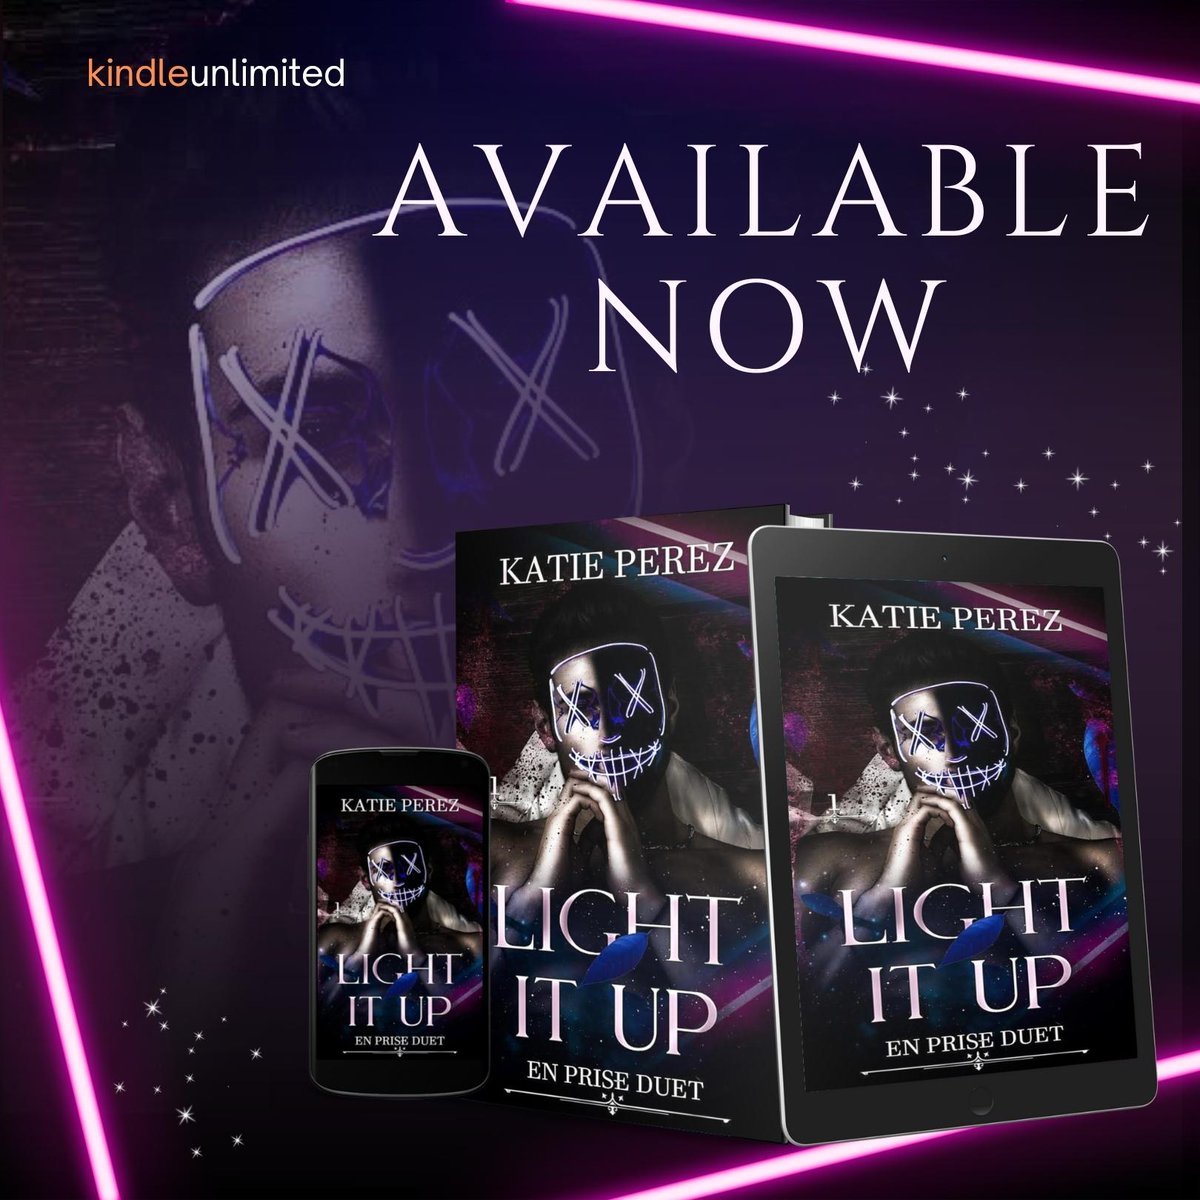 ✨New Book Alert
LIGHT IT UP by Katie Perez
#1ClickNow
a.co/d/iWUdrcF
Available in KU
#bookish #theauthoragency